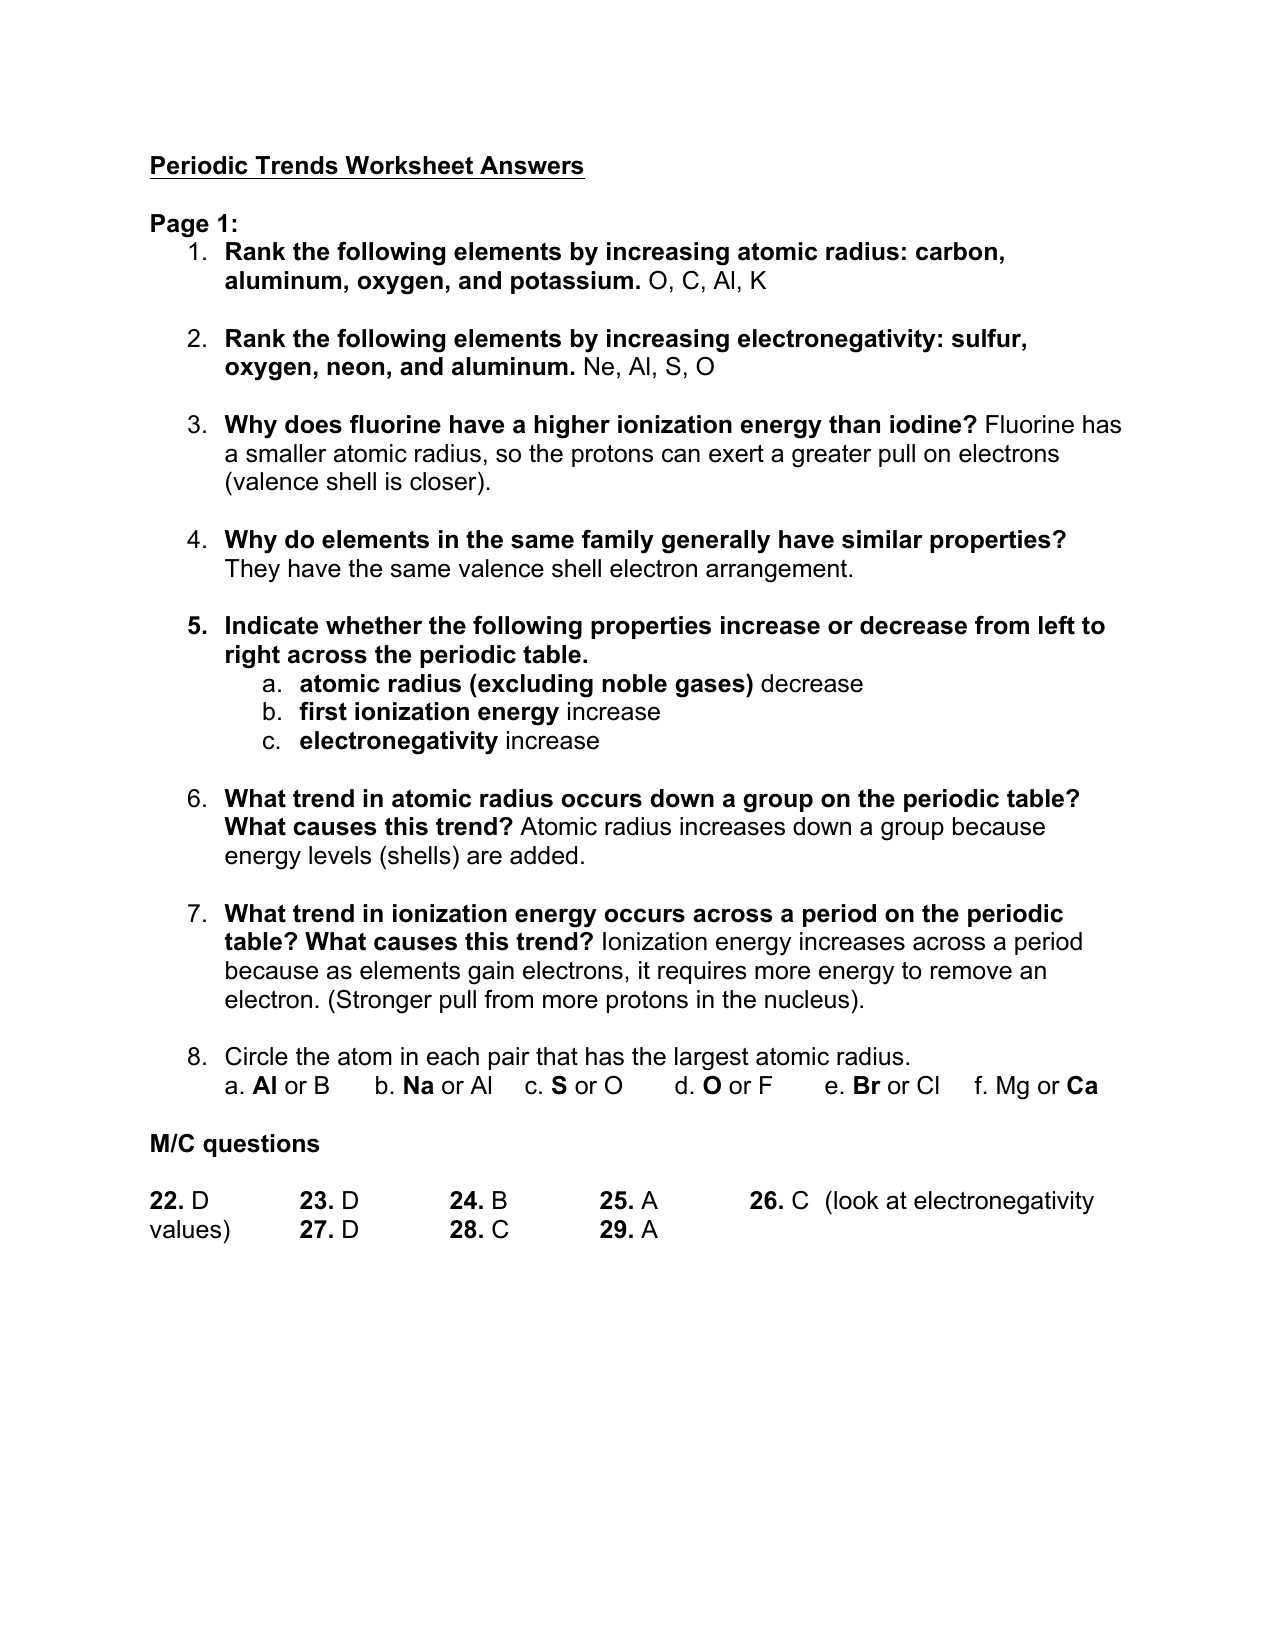 Periodic Table Puzzle Worksheet Answers or Periodic Trends Worksheet Answers Page 1 Rank the Following